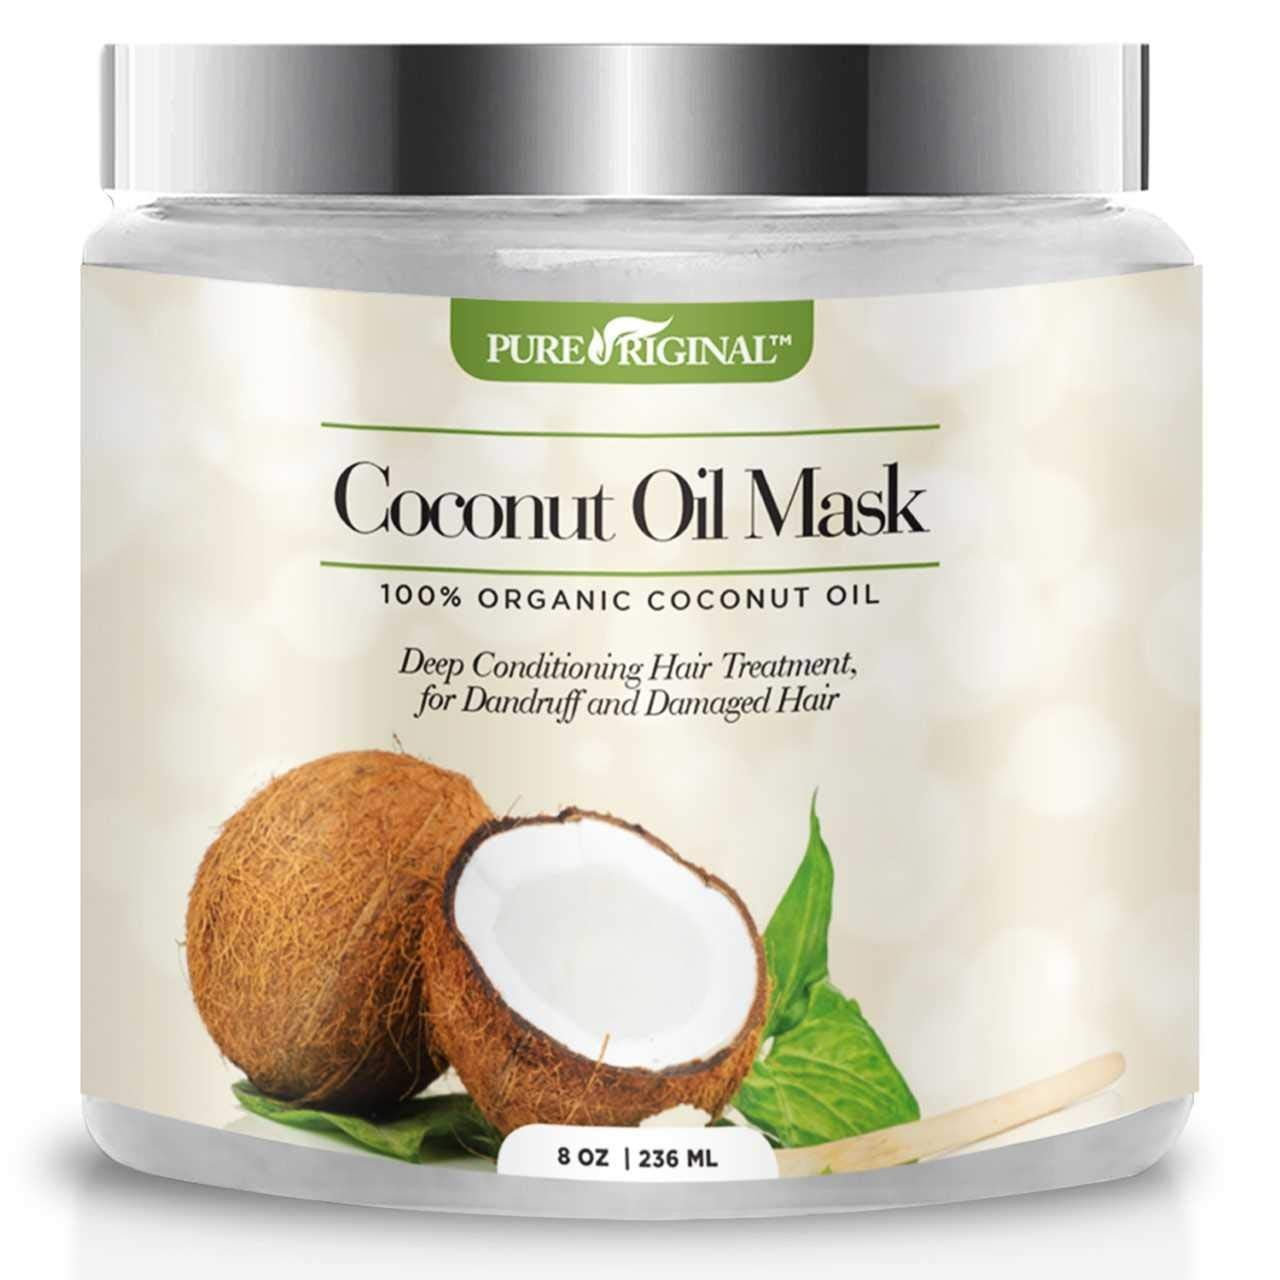 Pure Original Organic Coconut Oil Hair Mask, Natural Hair Care Treatment -  Hydrating & Restorative Mask - Promotes Healing and Natural Hair Growth,  Repairs Dry and Damaged Hair, 8 oz. 